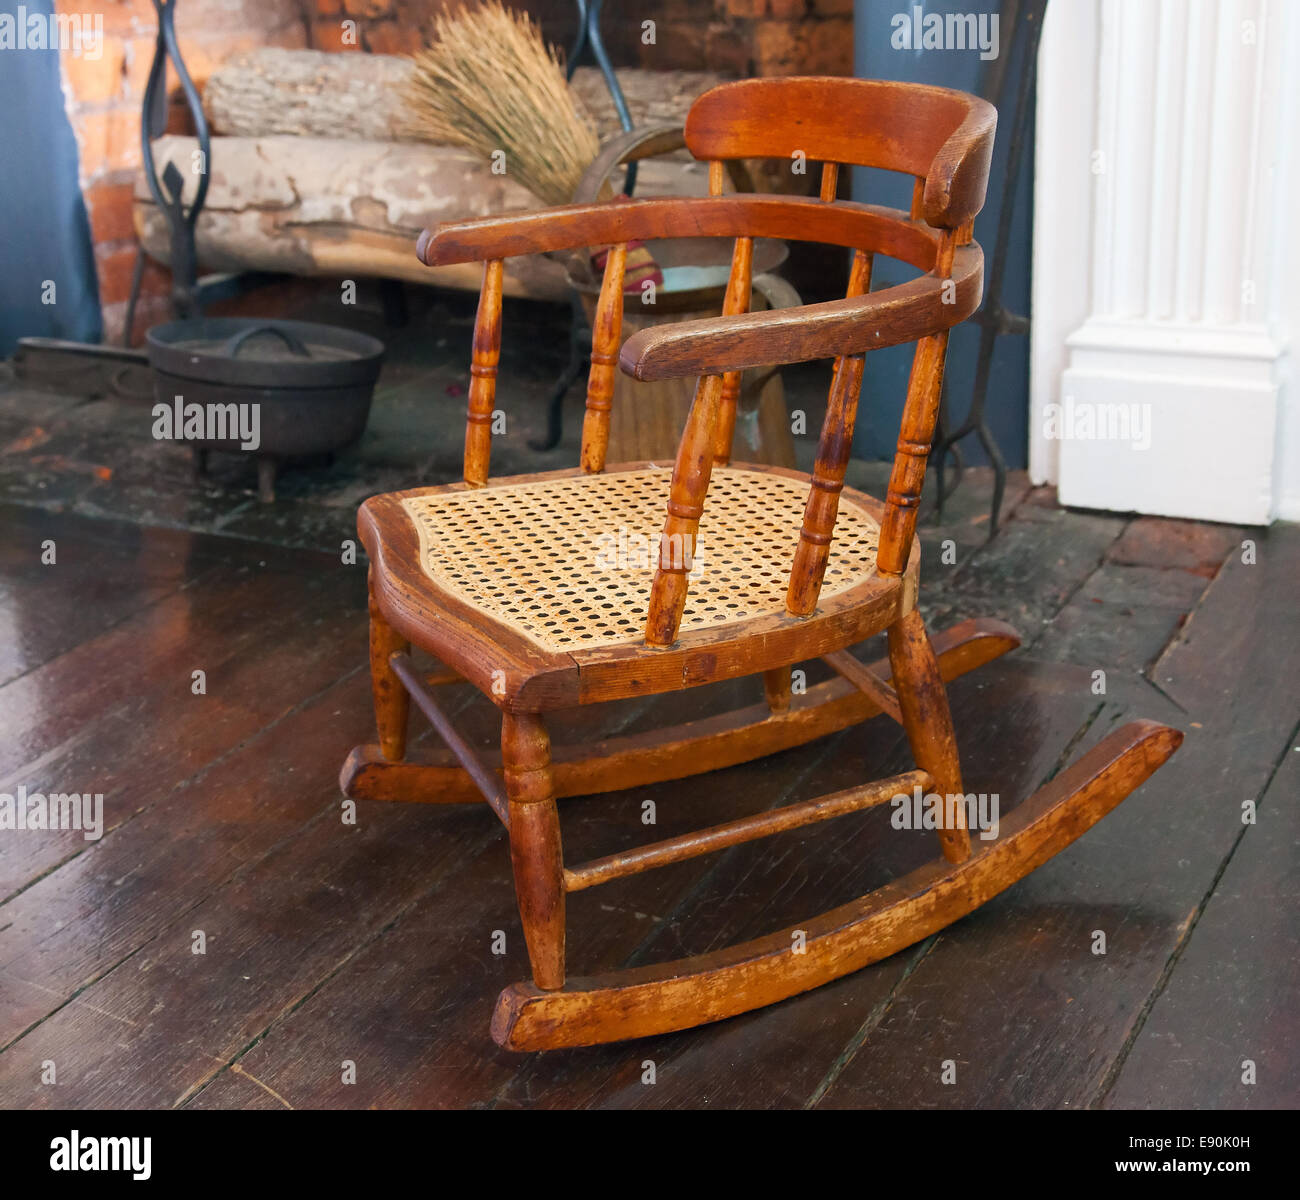 Childs rocking chair Banque D'Images